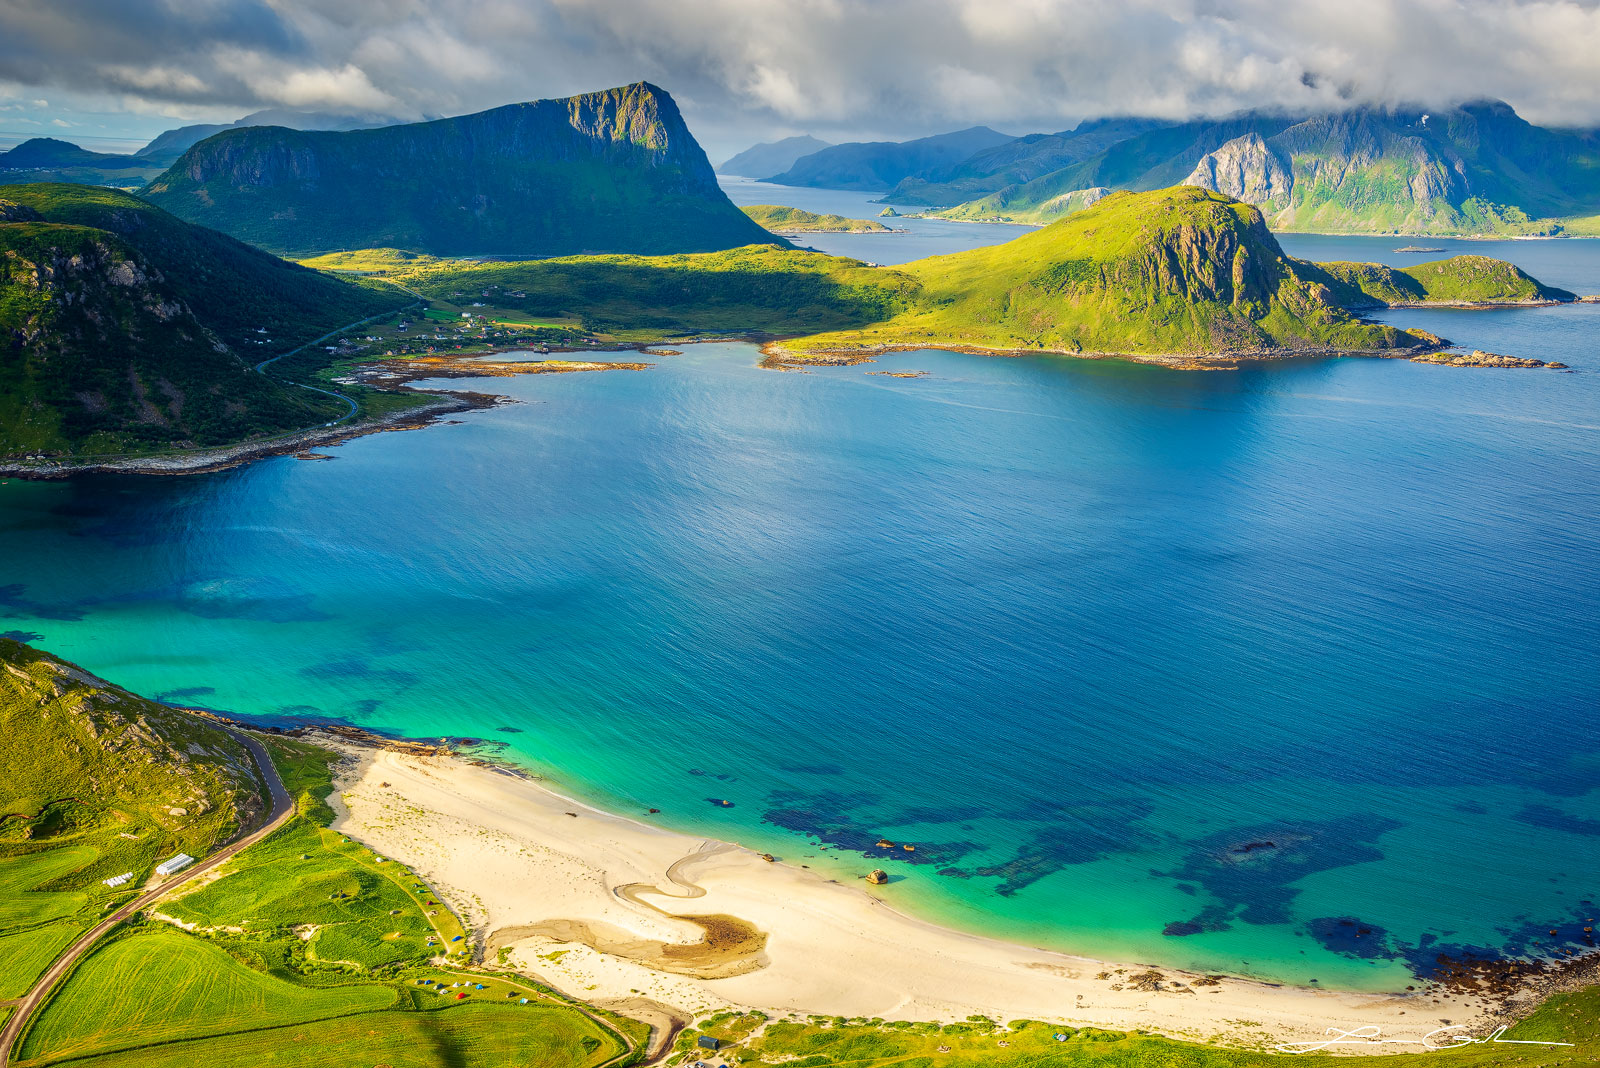 An aerial view of a turquoise beach in the Lofoten Islands, Norway - Gintchin Fine Art